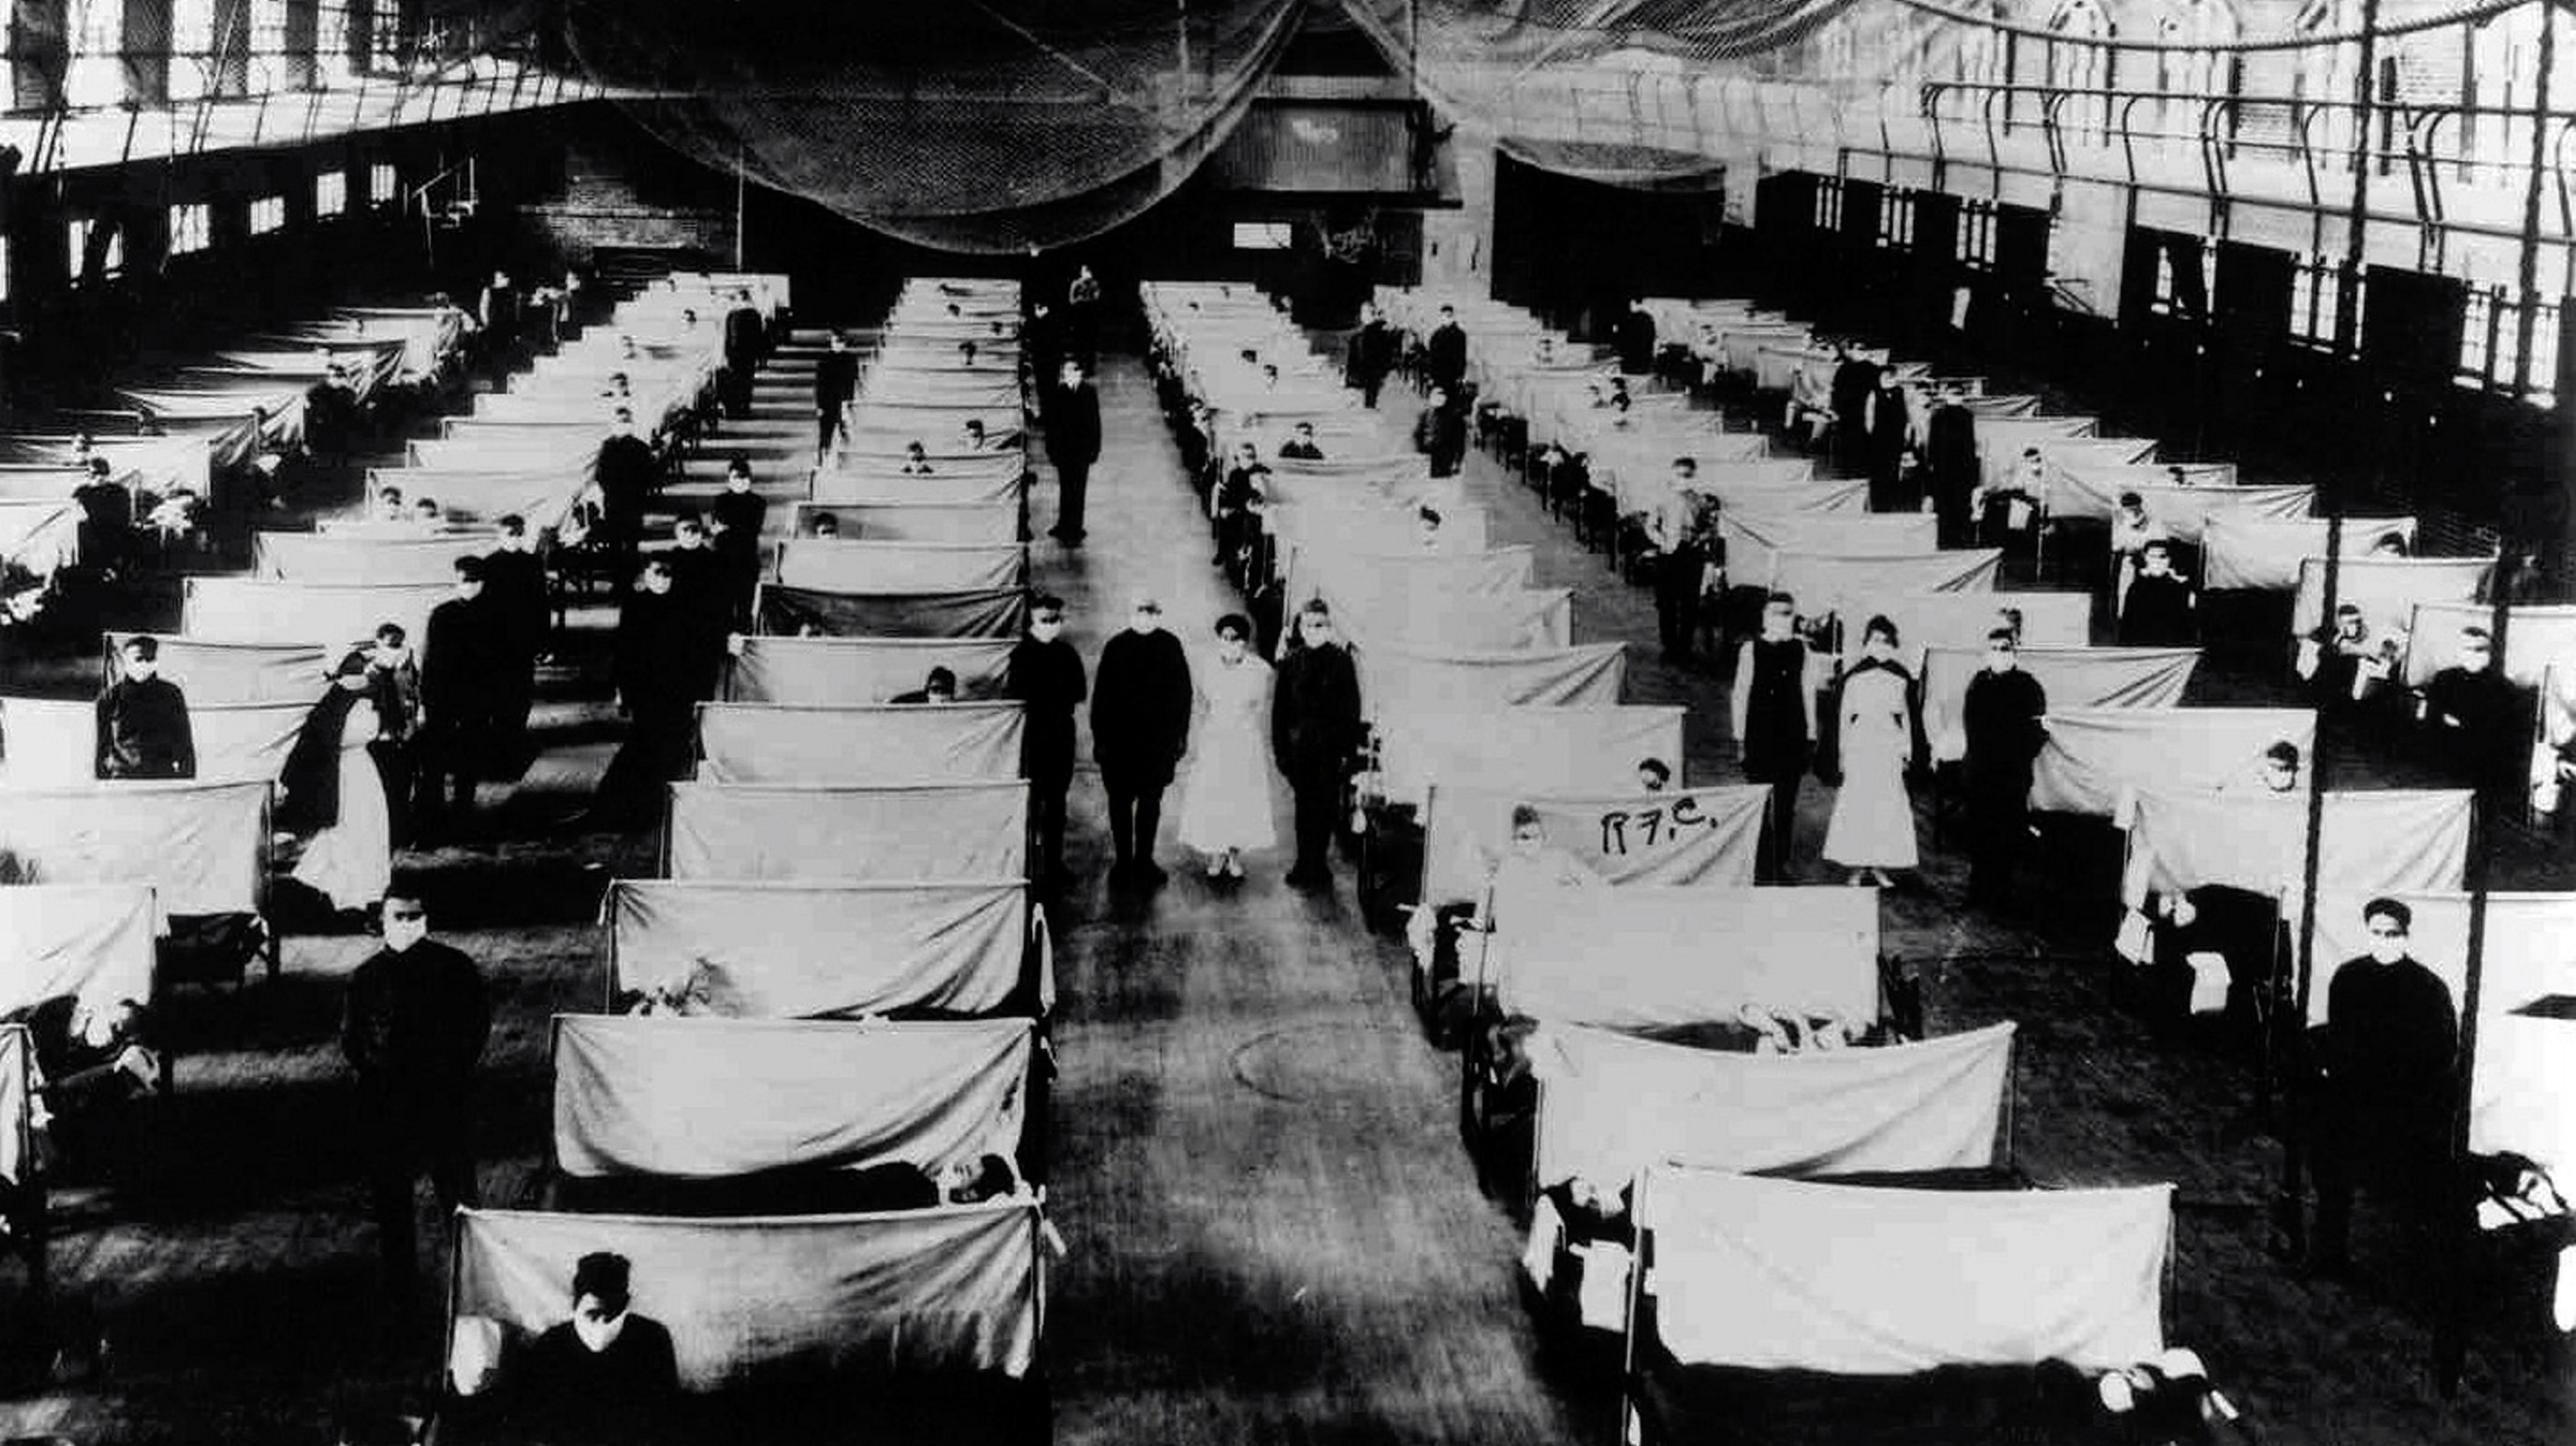 1918 flu mutated to become deadlier in later waves, century-old ...